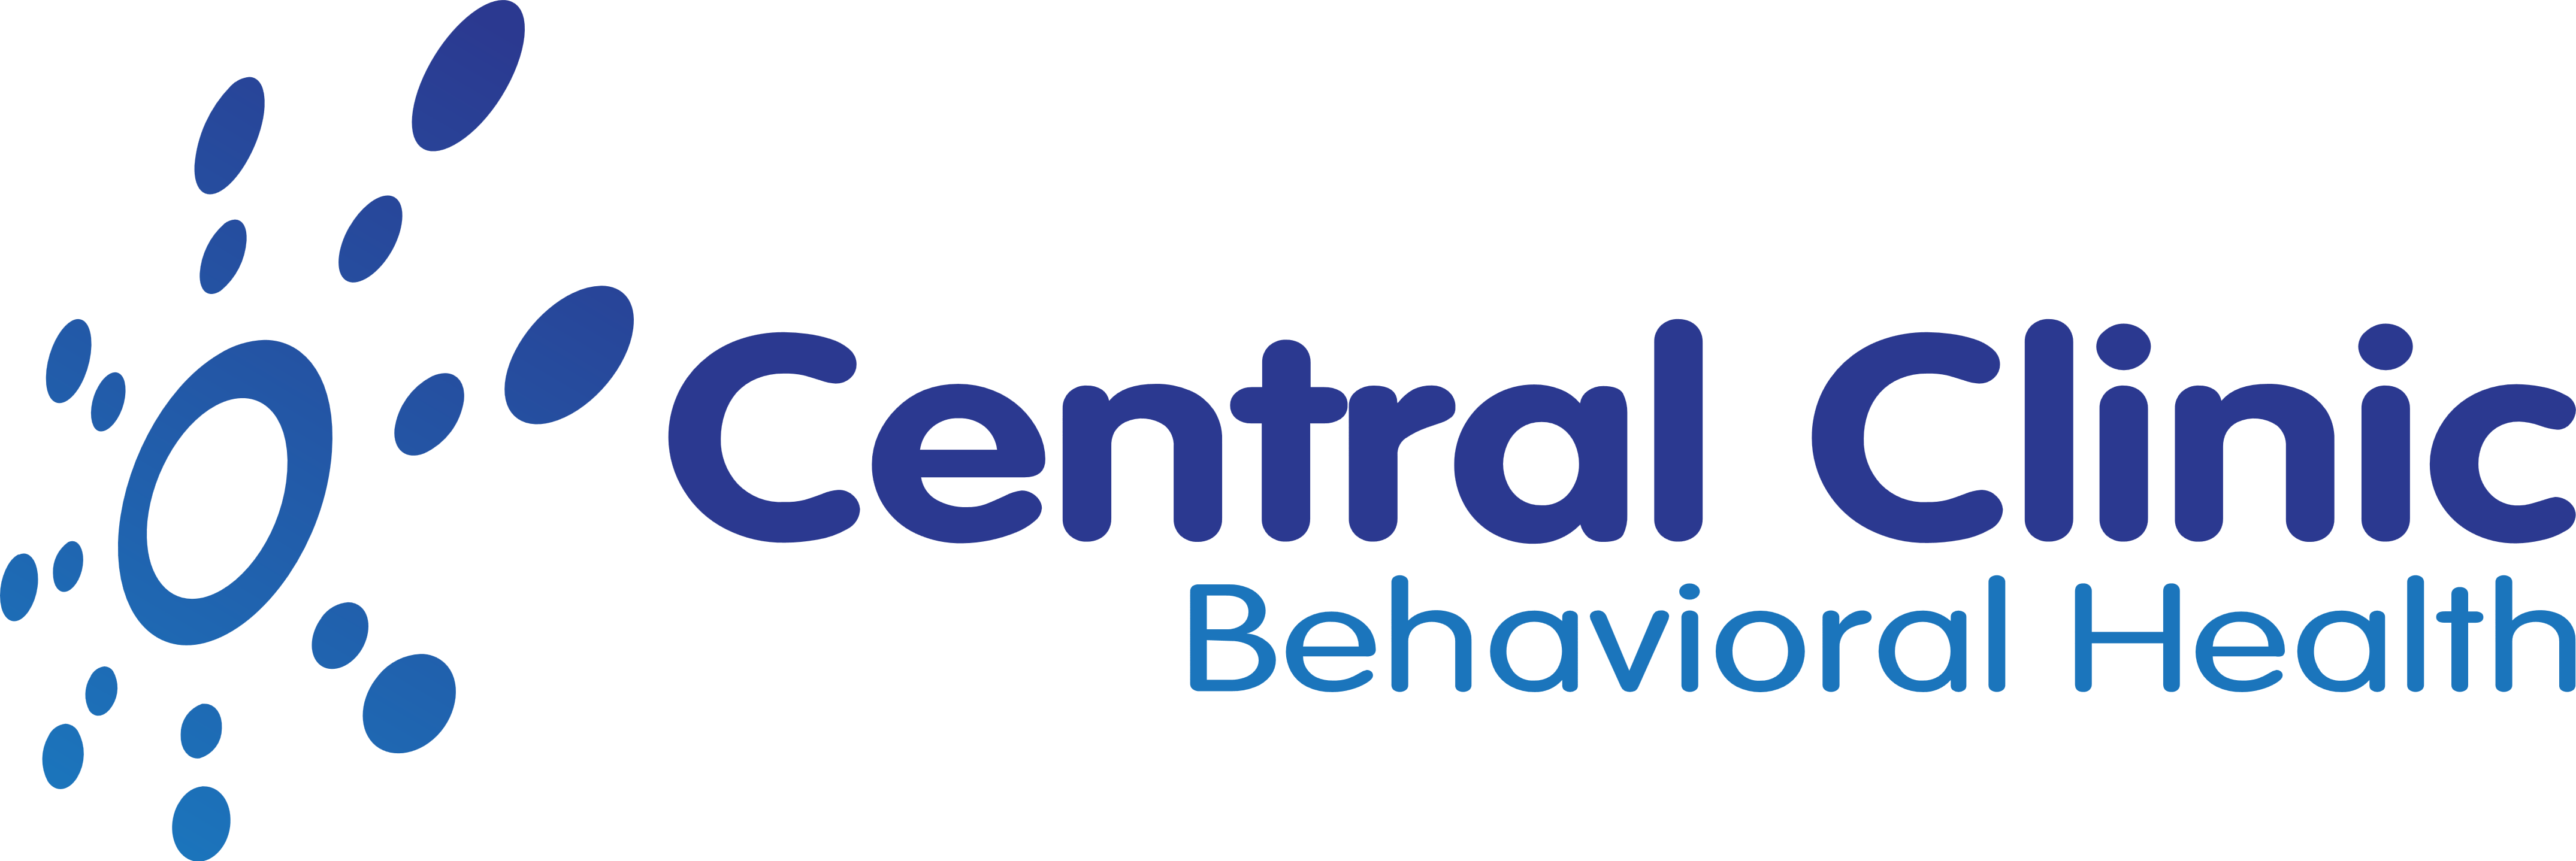 Central Clinic Behavioral Health – Logos Download